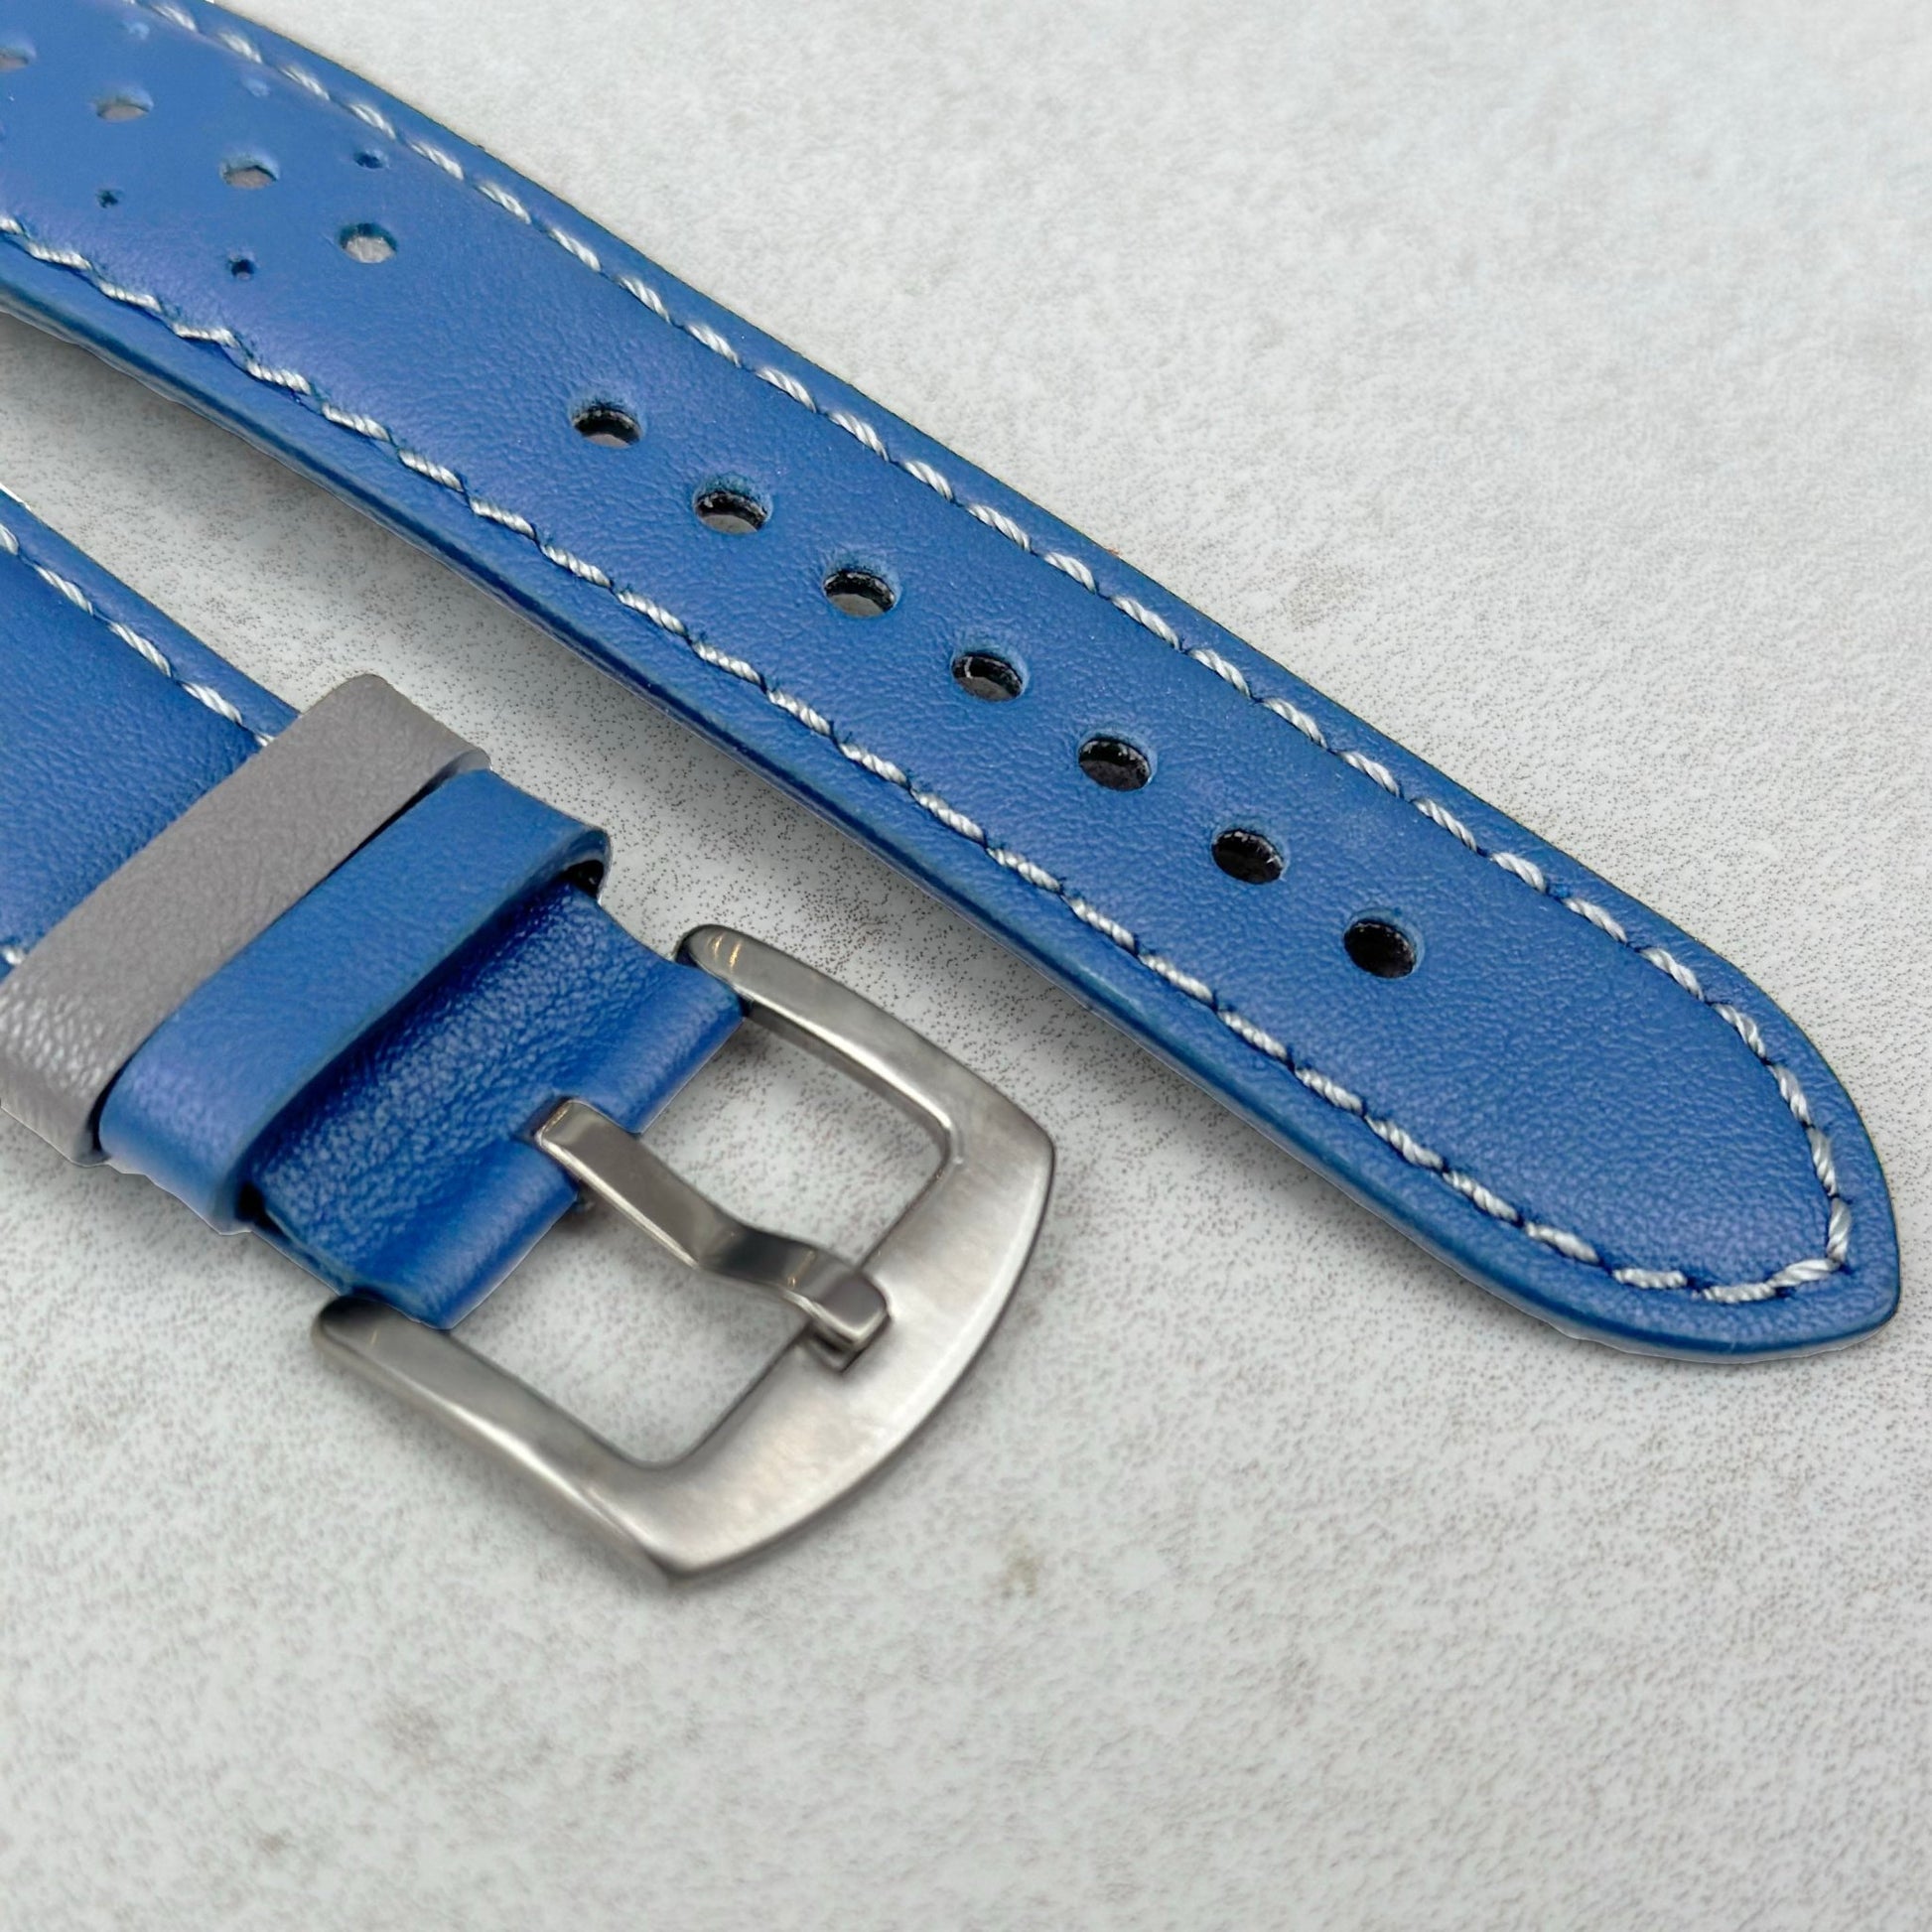 Brushed 316L stainless steel buckle on the Le Mans blue and grey full grain leather Apple watch strap.